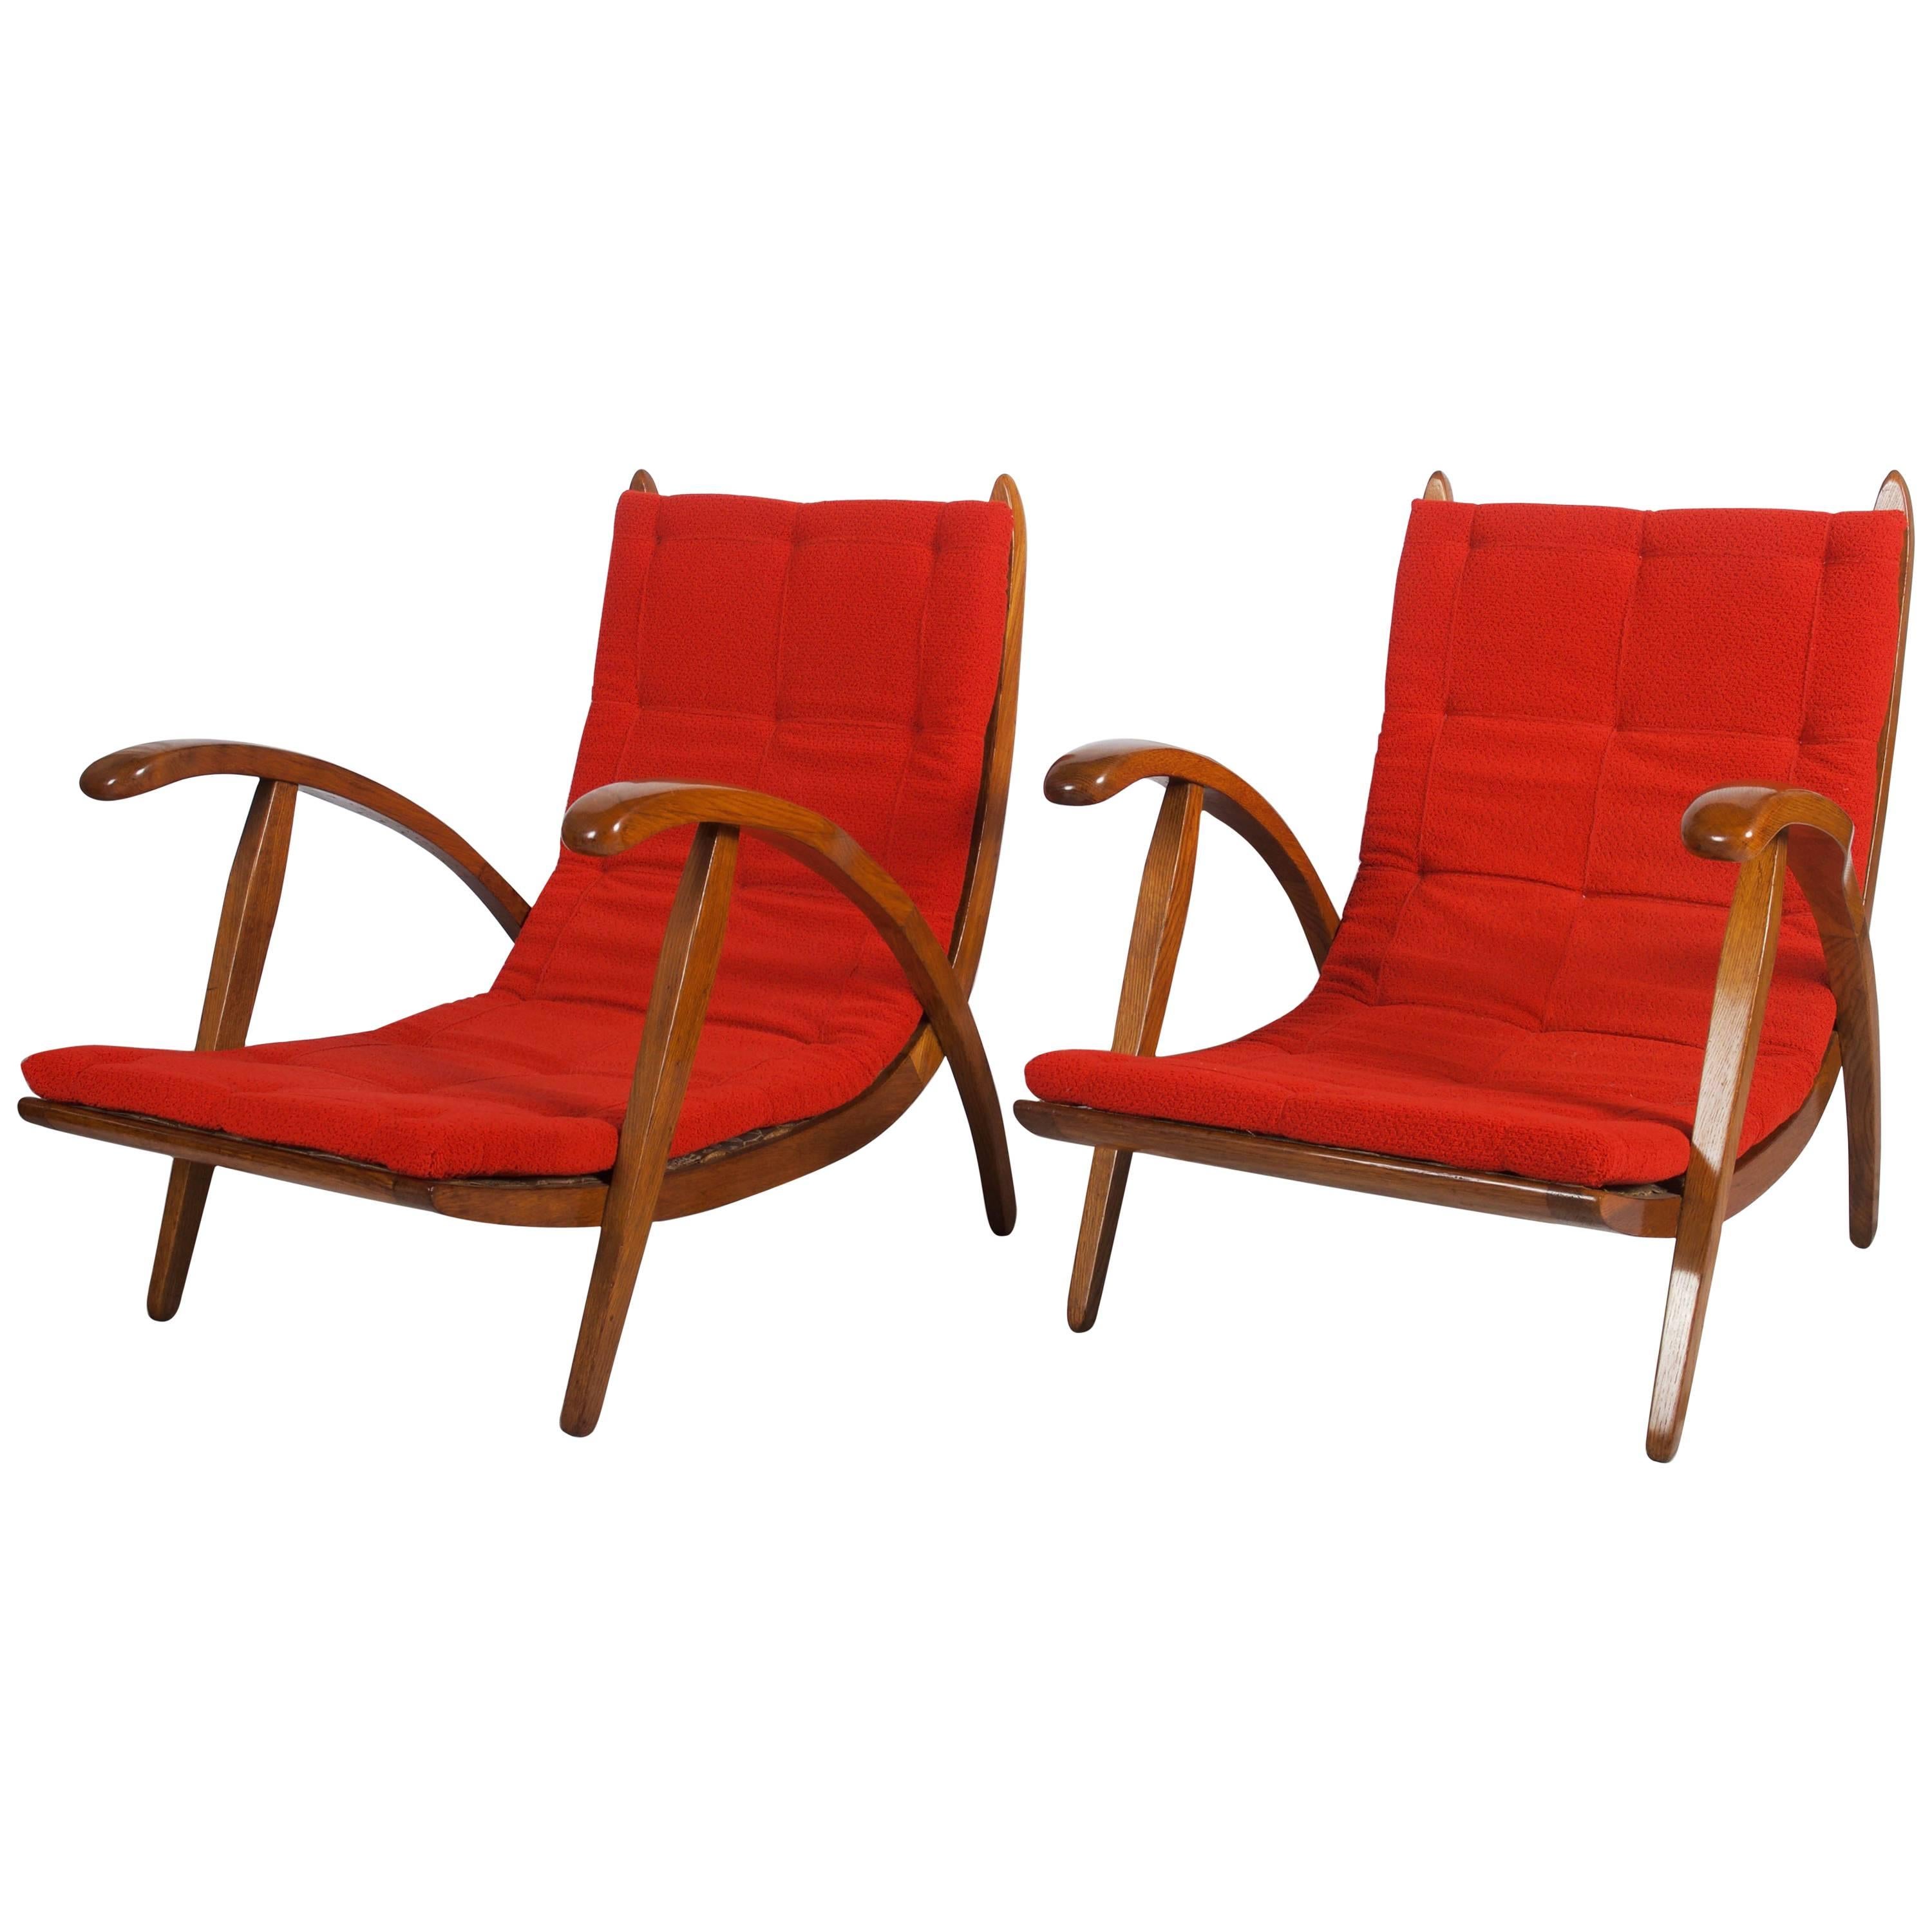 Very Rare Pair of Mid-Century Armchairs Attributed to Up-Zavody Brno For Sale